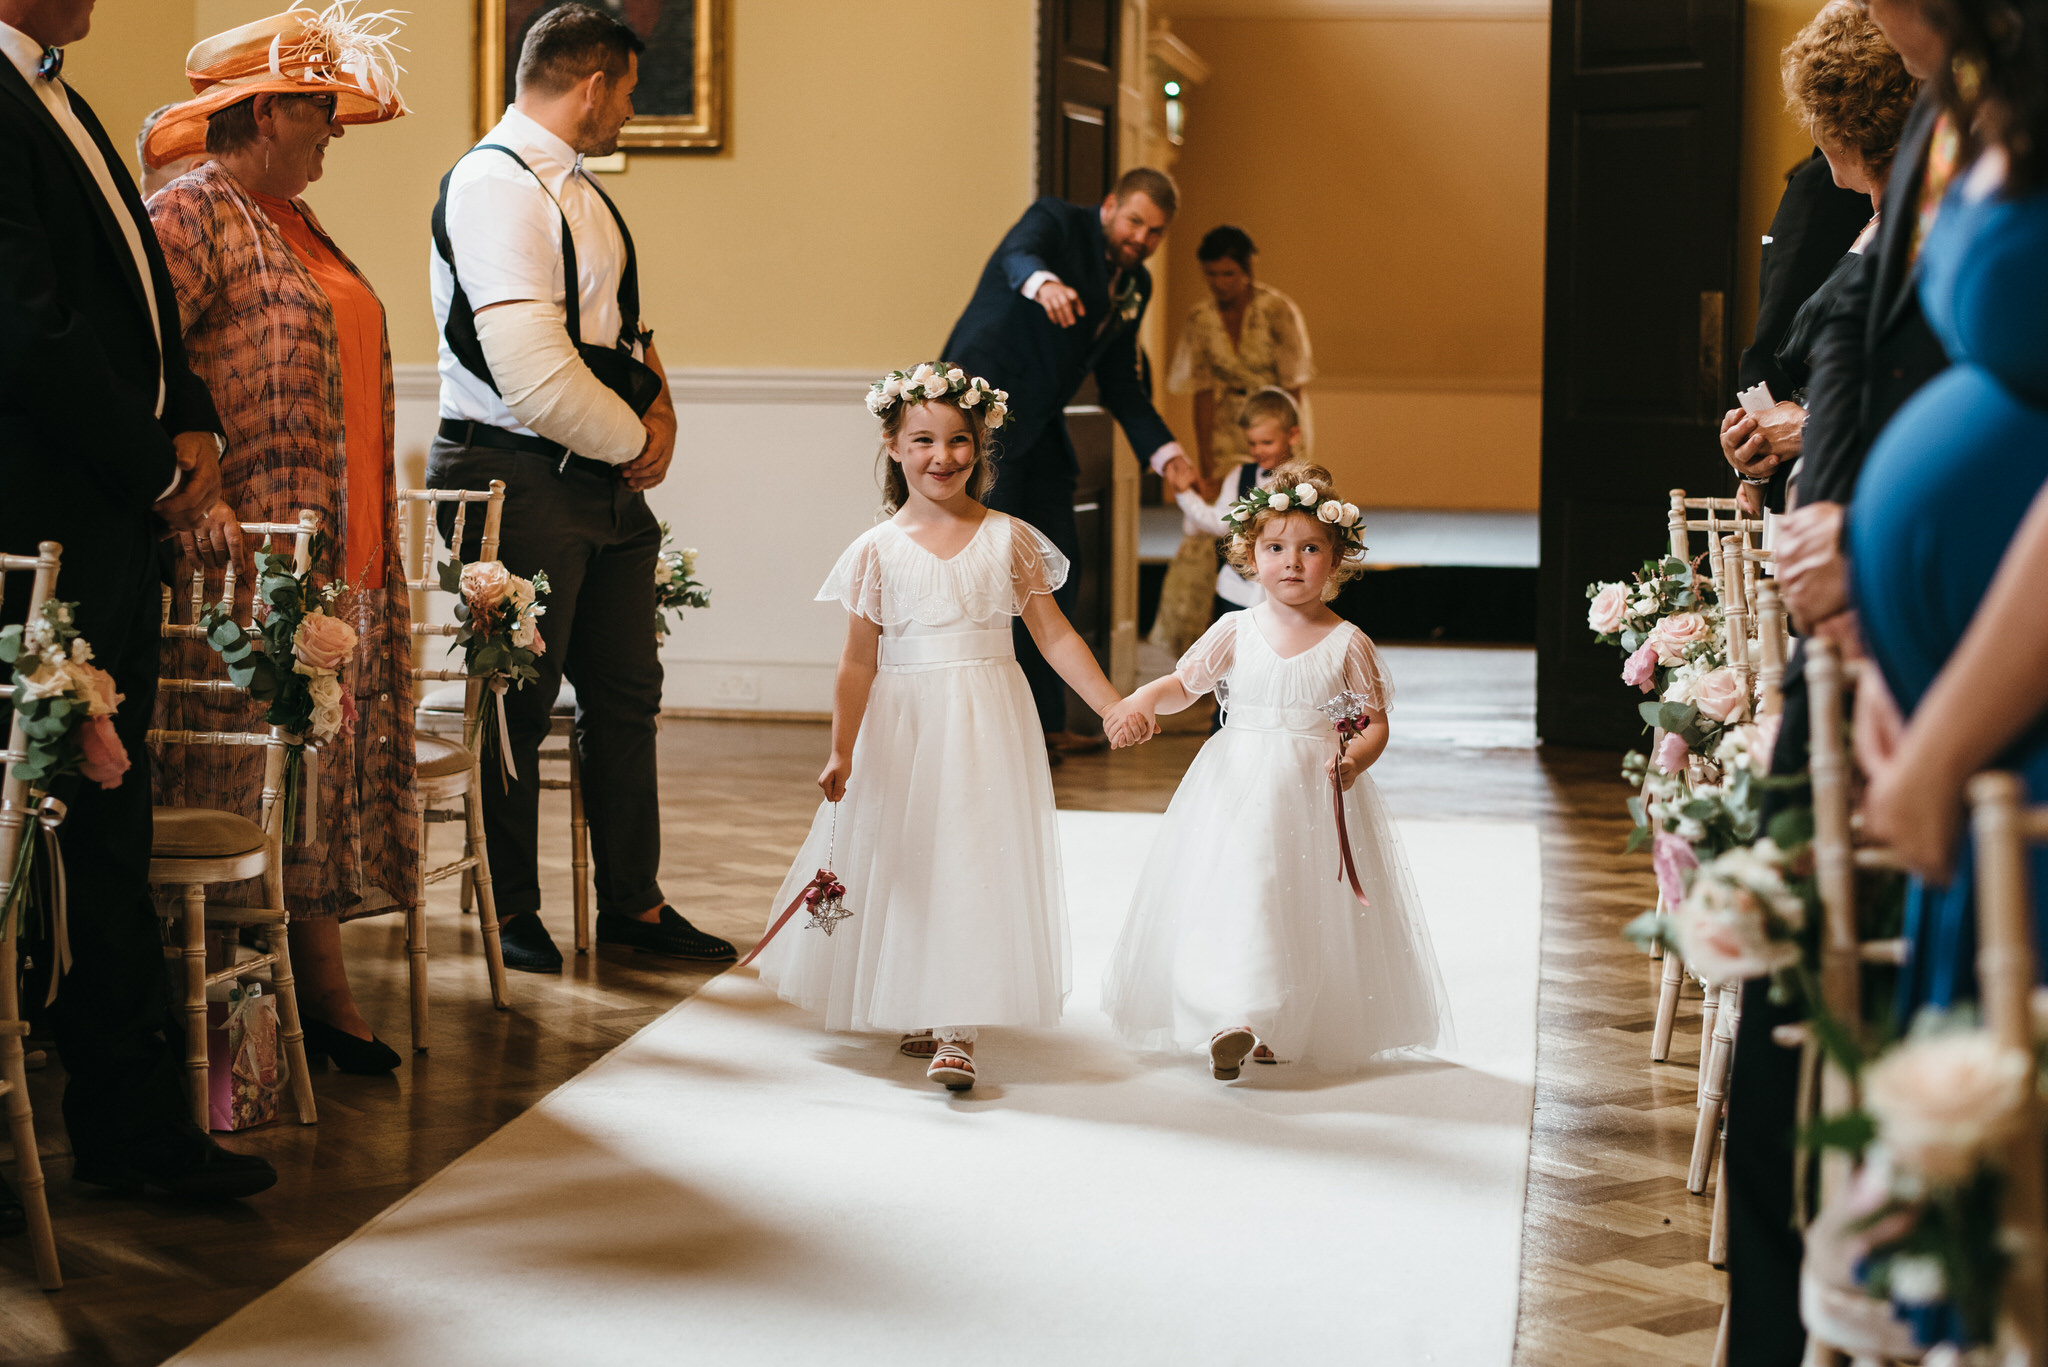 Flower girls walk down the aisle, Assembly Rooms, Bath